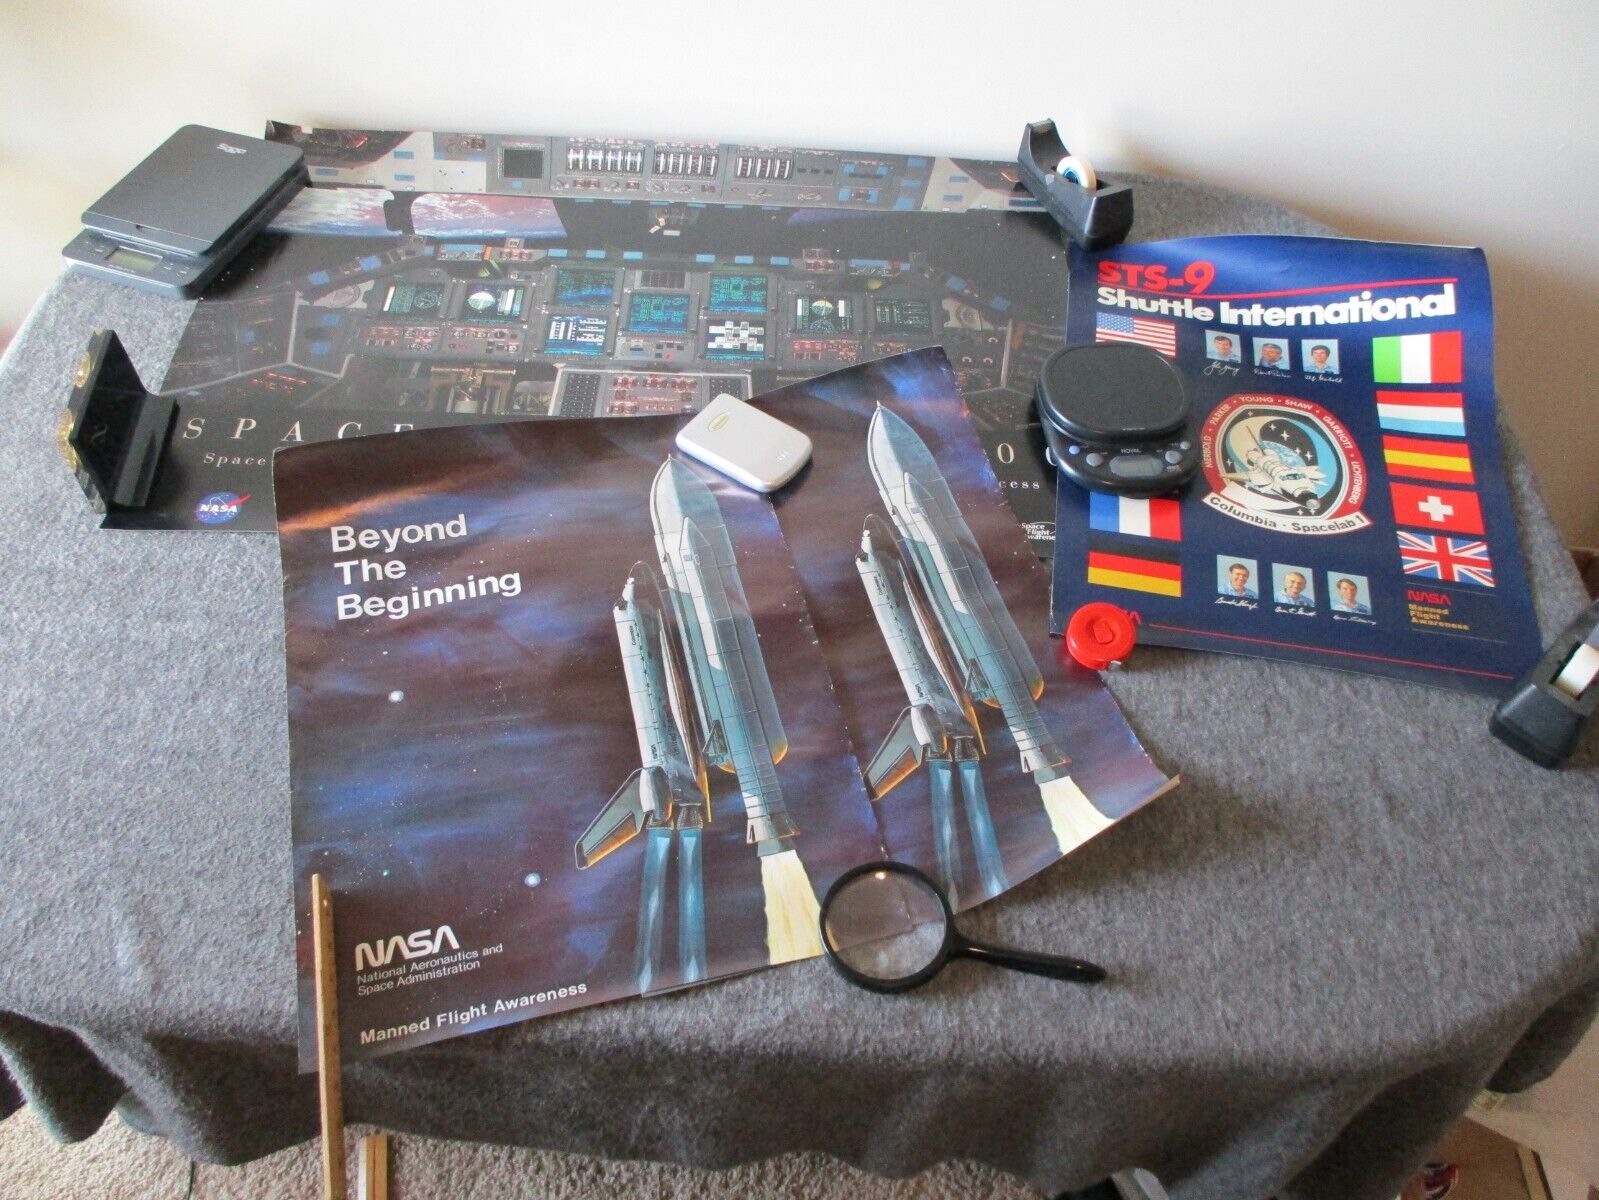 NASA SPACE SHUTTLE COCKPIT/MANNED FLIGHT BEYOND THE BEGINNING/STS9 POSTERS SET4